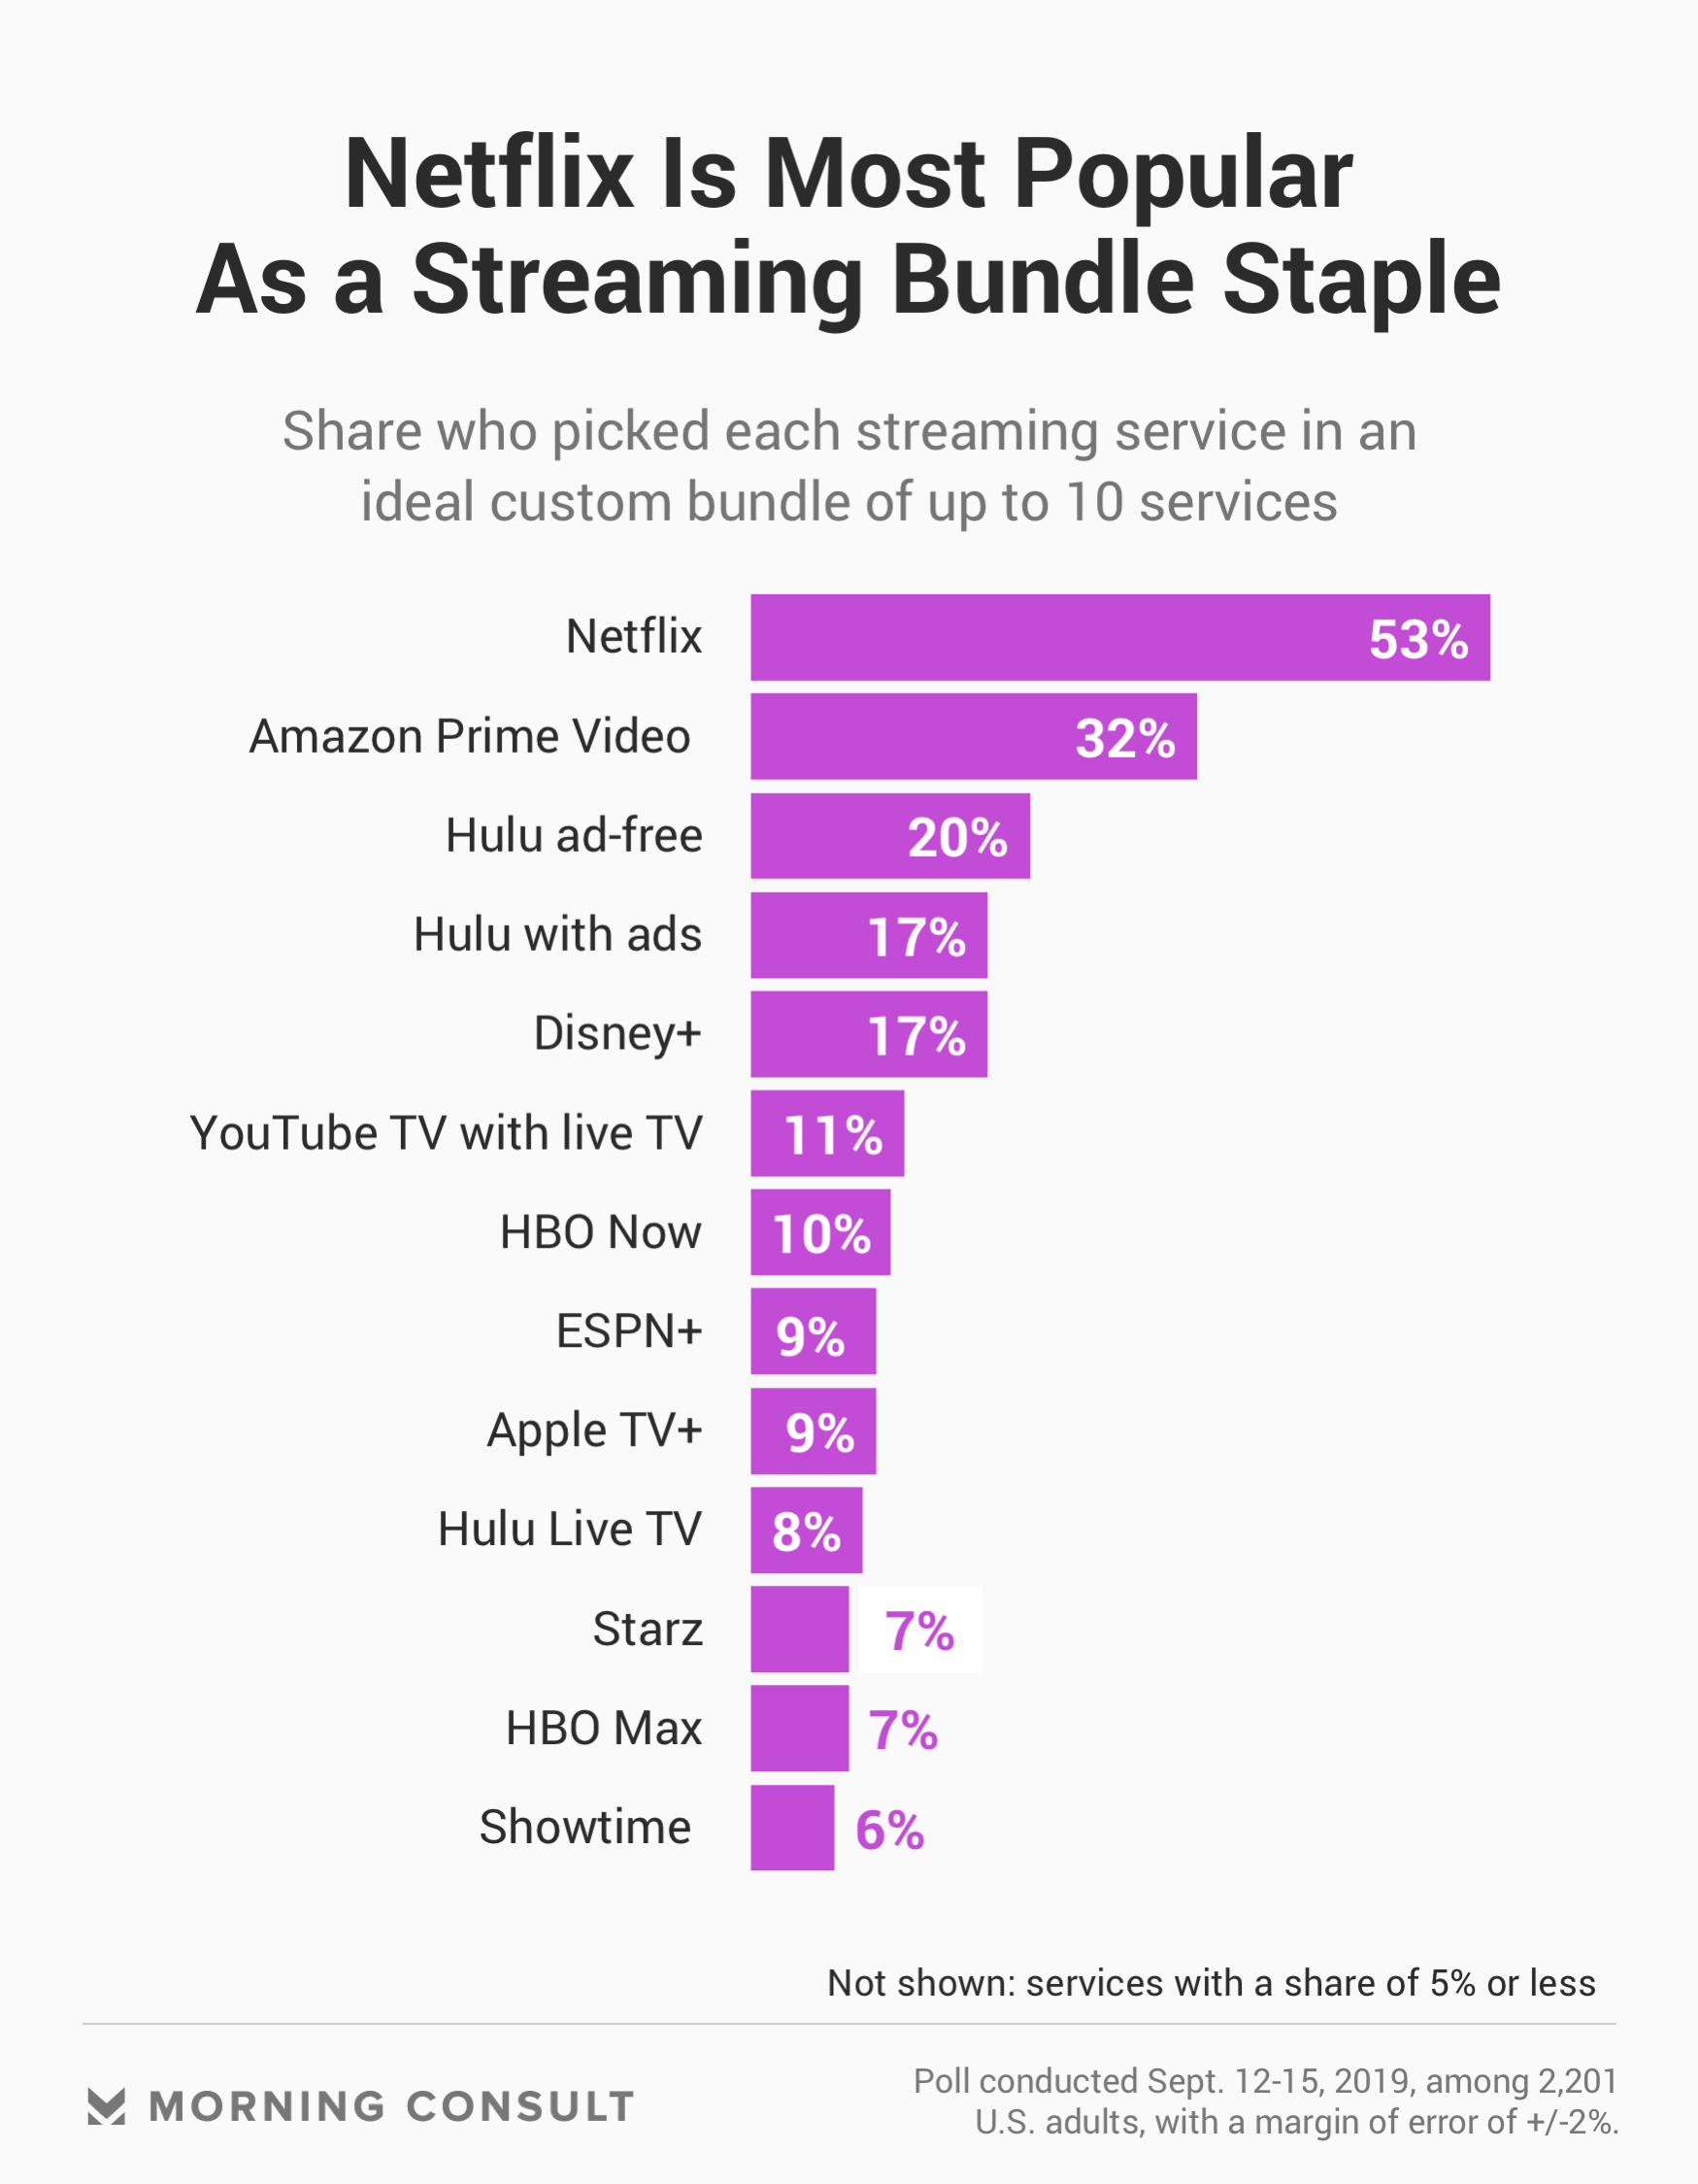 Netflix and Amazon Lead Users’ Choices for Ideal Streaming Bundles